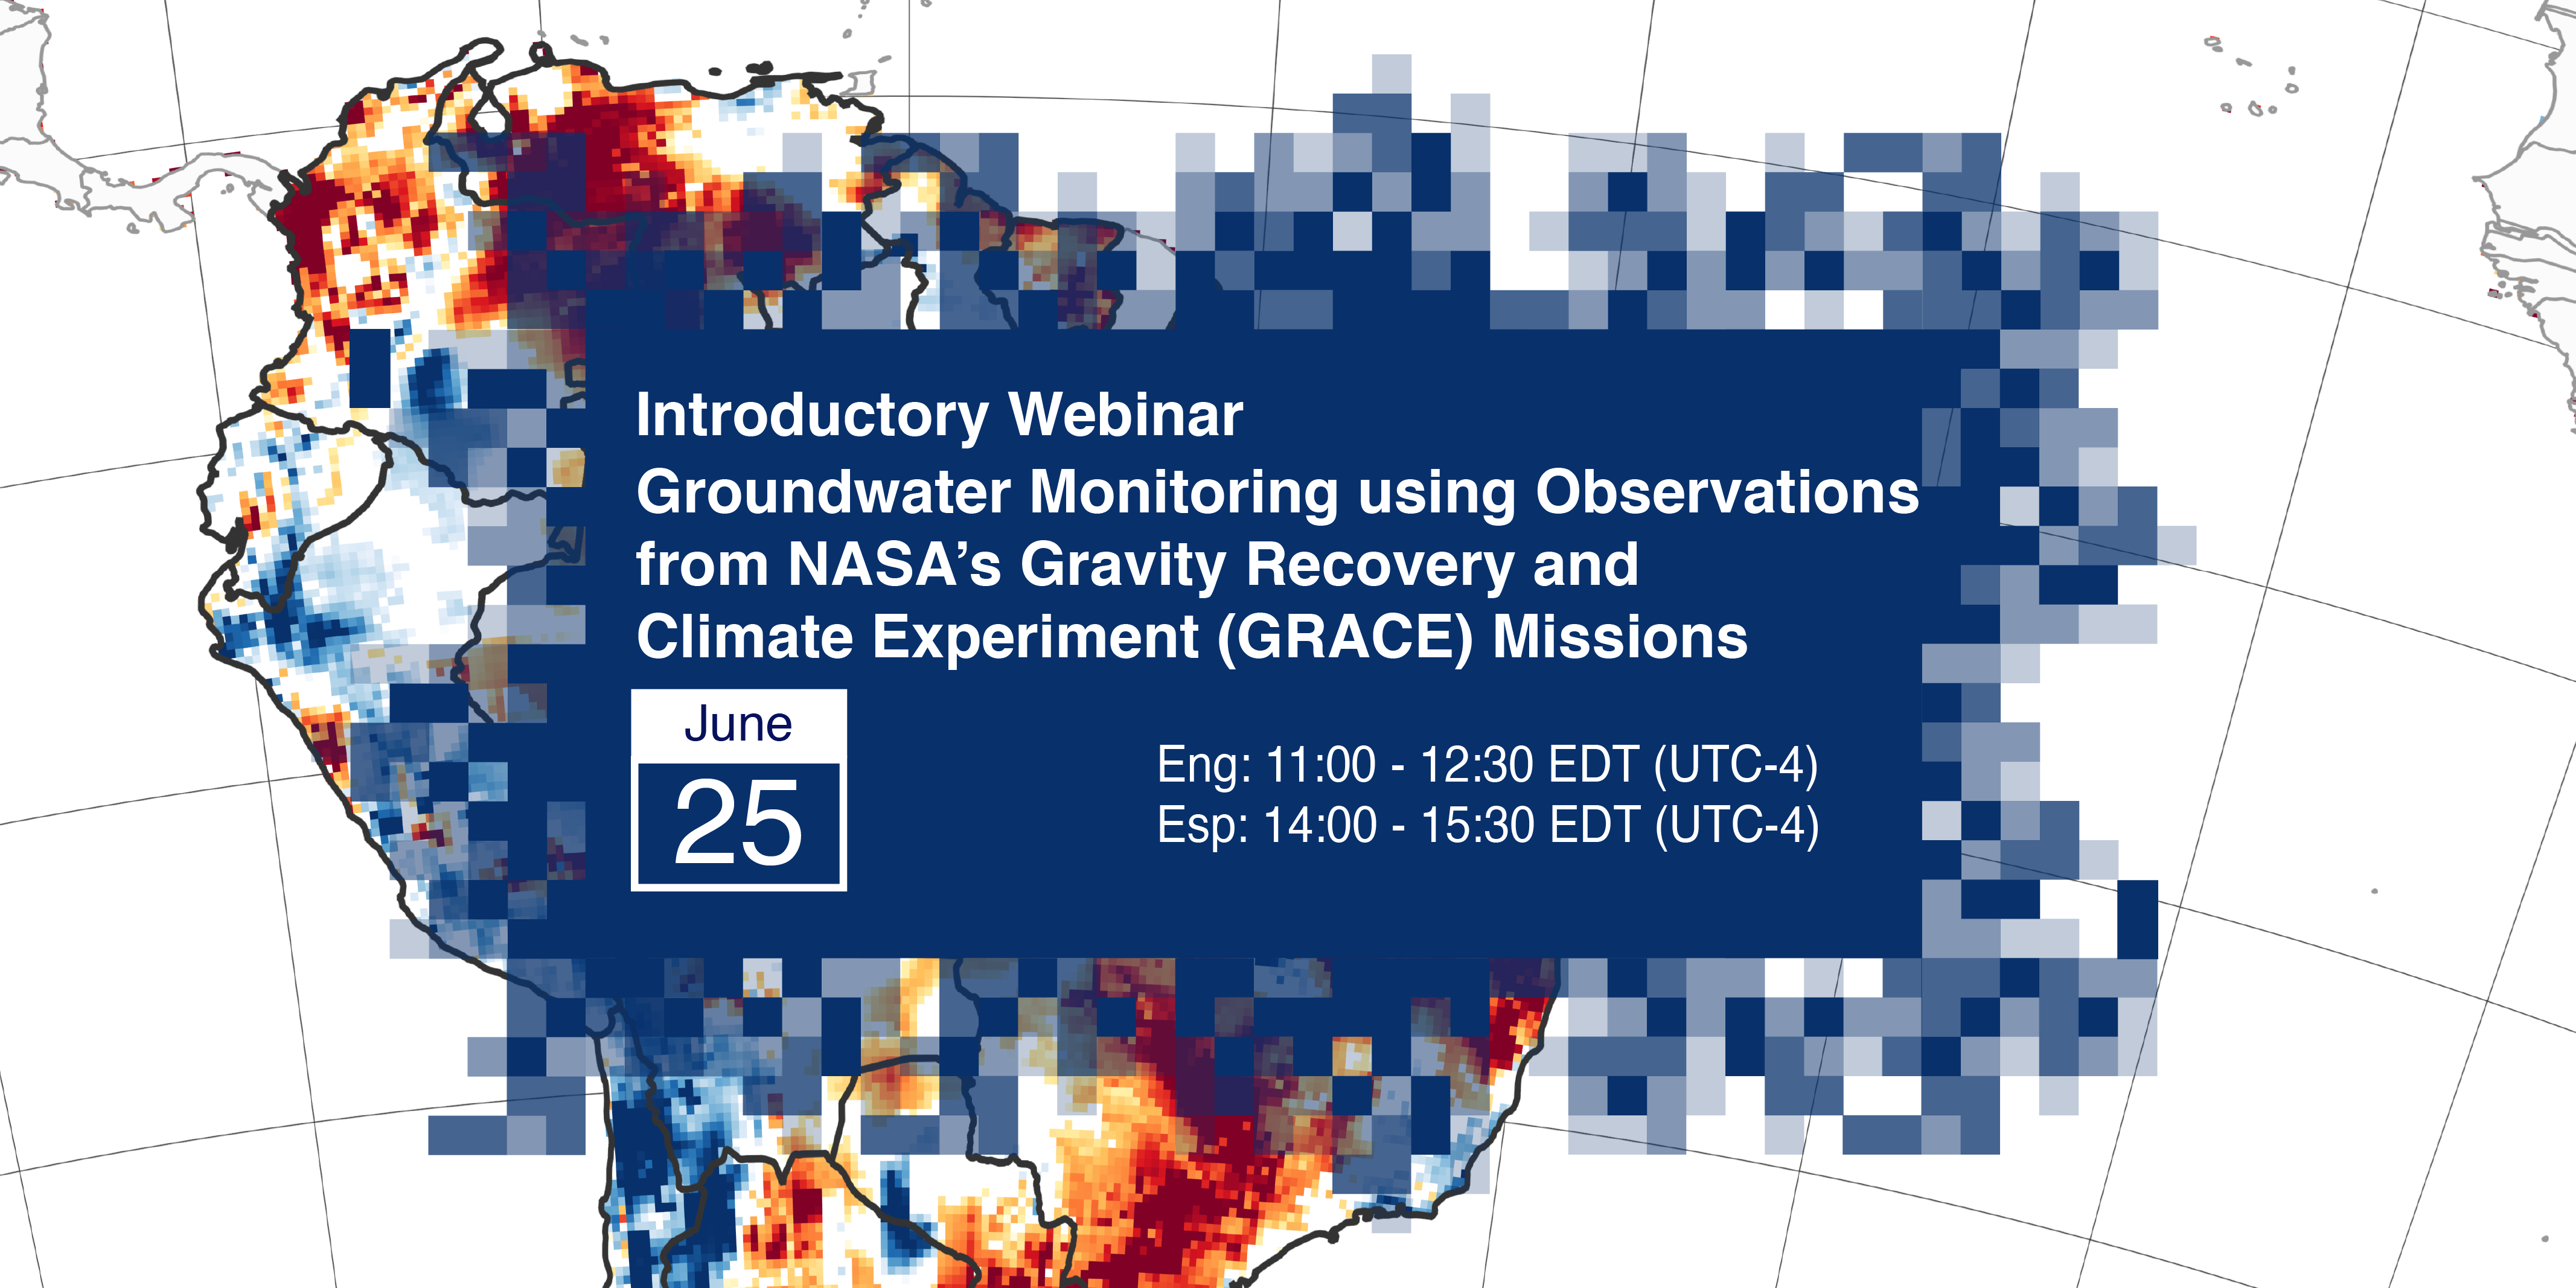 Groundwater Monitoring using Observations from NASA&rsquo;s Gravity Recovery and Climate Experiment (GRACE) Missions&nbsp;(June 25, 2020)Bilingual Webin...